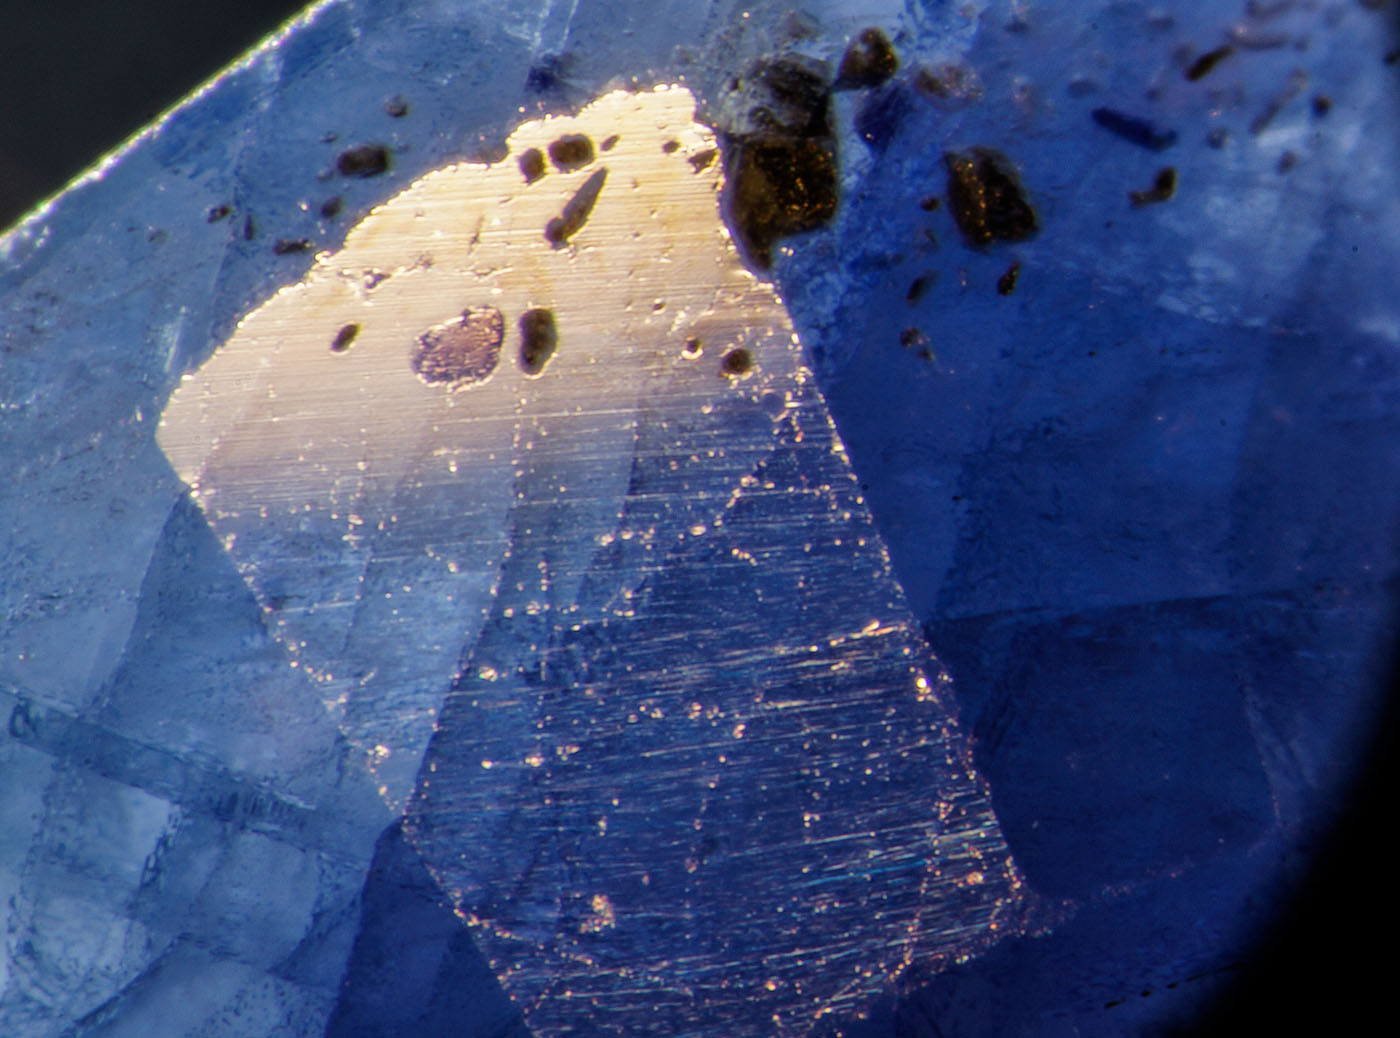 An inclusion in cobalt-doped glass filled sapphire reveals the lower luster of the glass filler. Photo: Richard W. Hughes, Lotus Gemology.